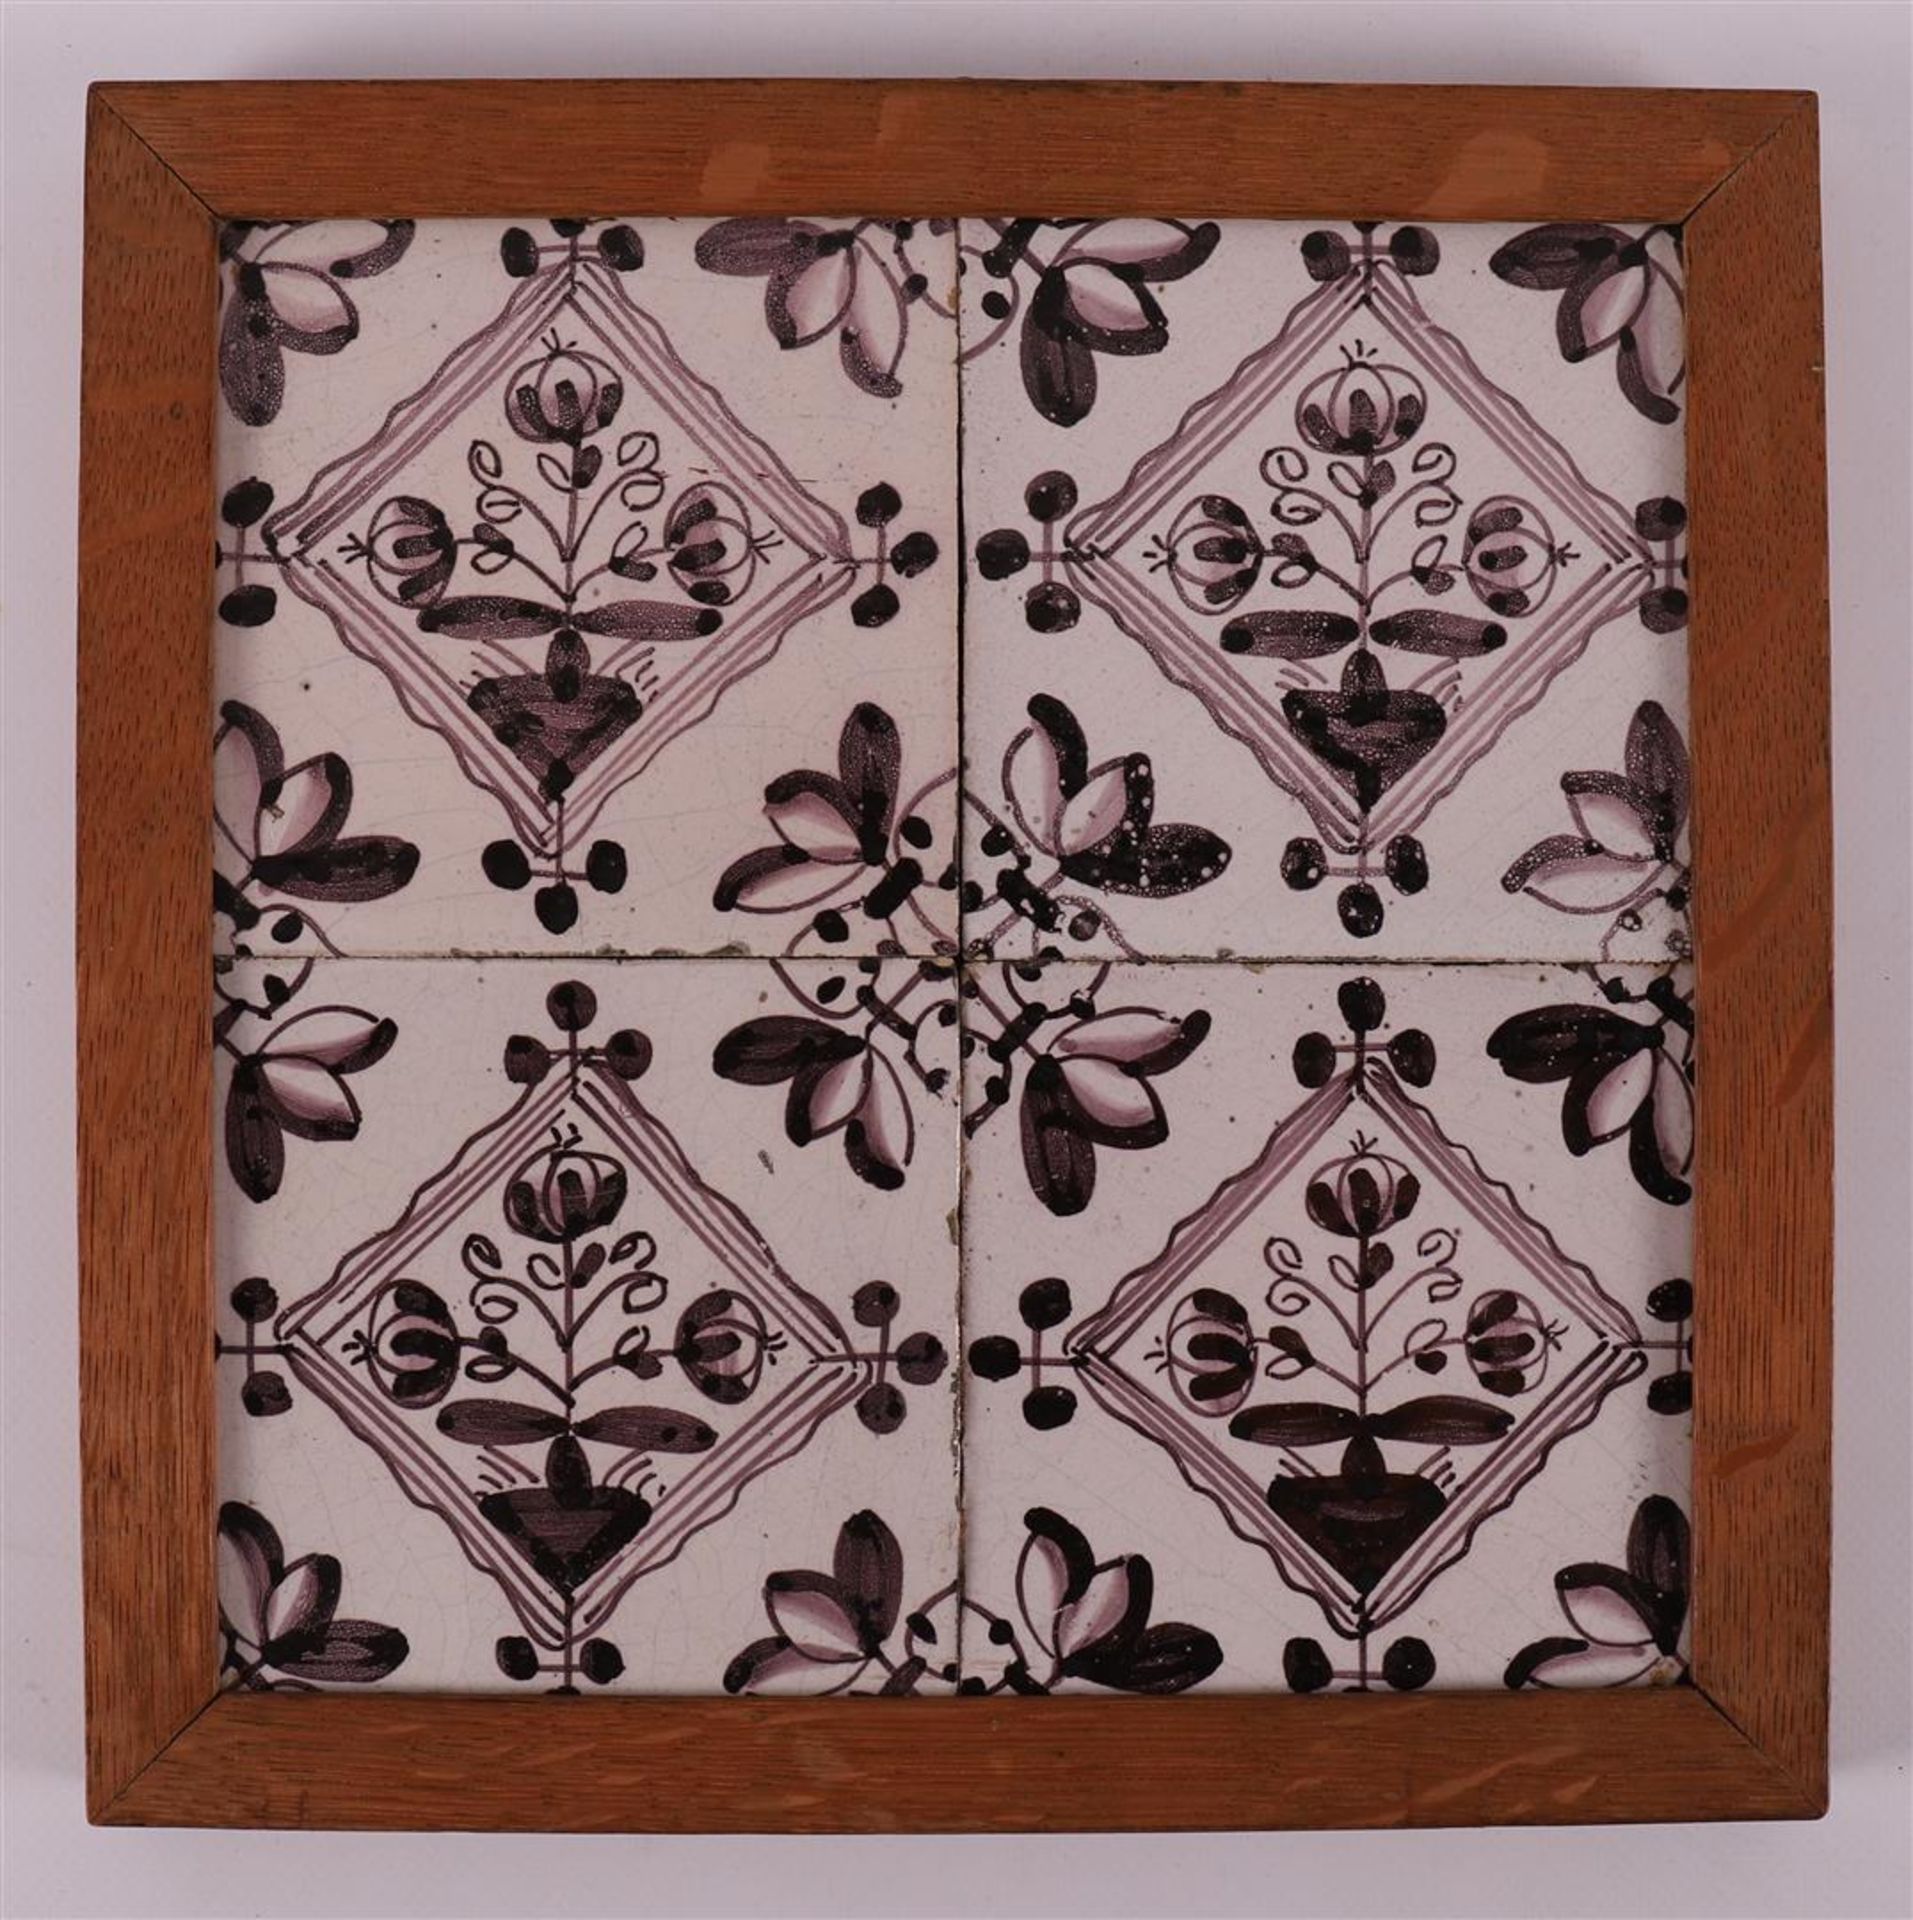 A four-step tile tableau of manganese-colored flower tiles, 18th century.